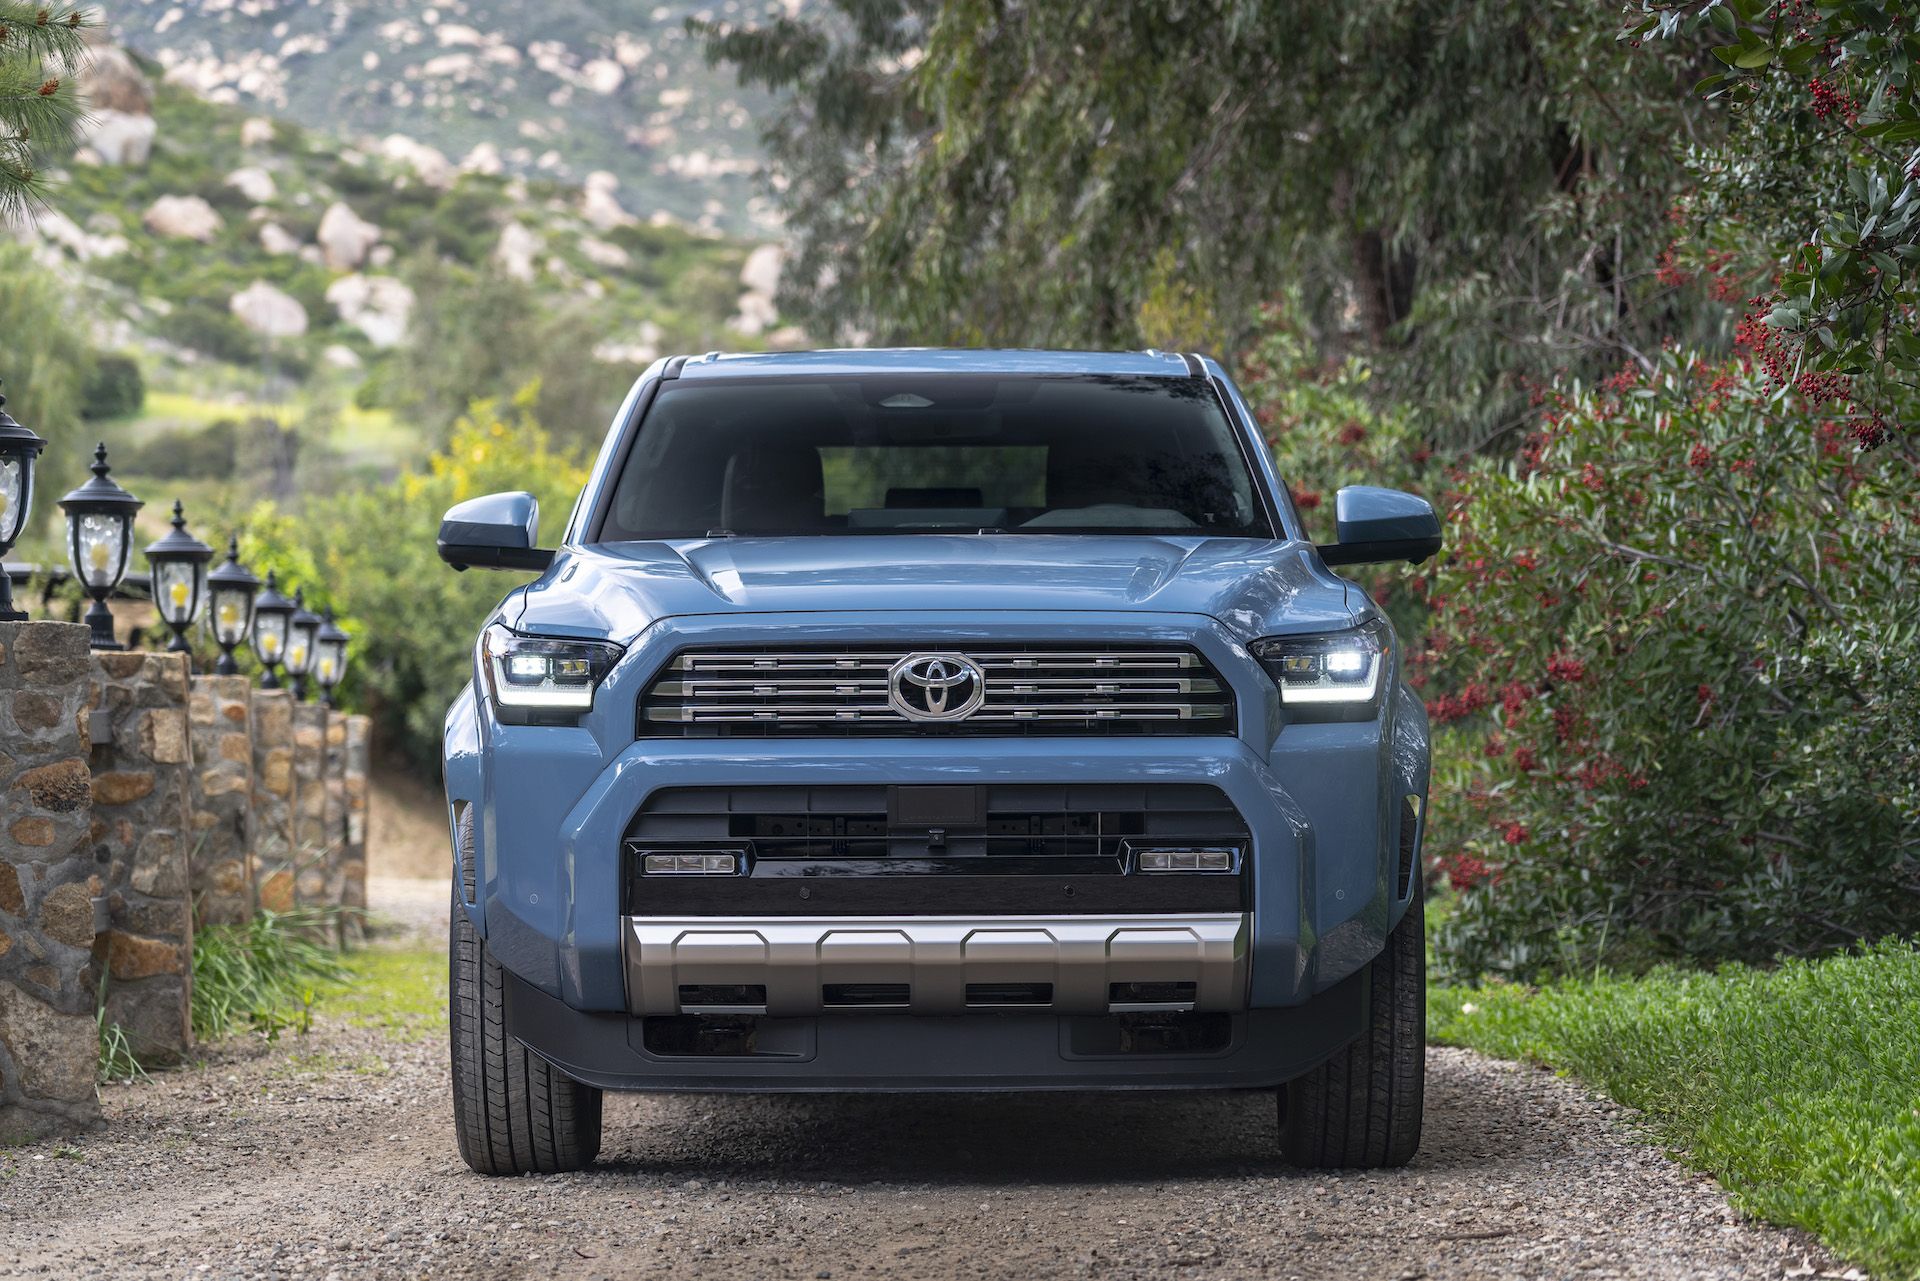 2025 Toyota 4runner Photos: 2025 4Runner LIMITED (Interior, Cargo Space, Exterior) in Heritage Blue color 2025-toyota-4runner-limited-106-jpg-66156208a1831